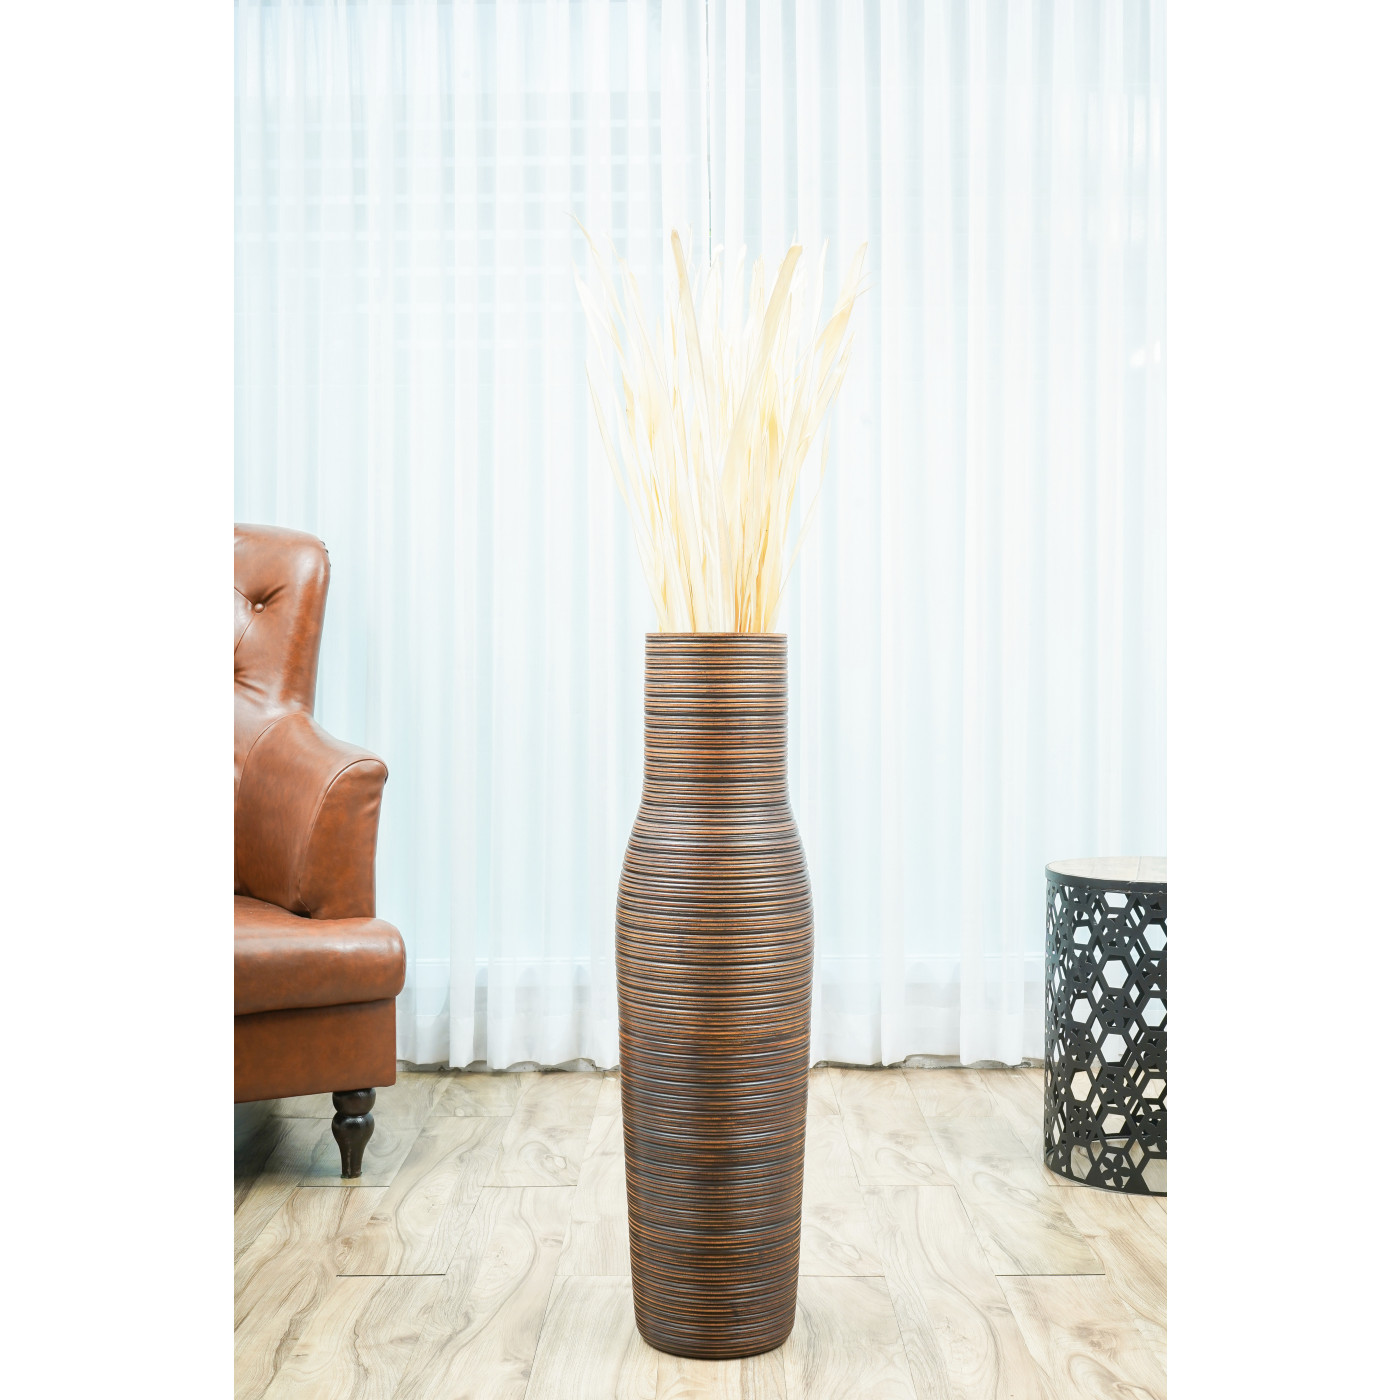 Silver-Coloured LEEWADEE Large Floor Vase – Handmade Flower Holder Made of Wood 36 inches Sophisticated Vessel for Decorative Branches and Dried Flowers 